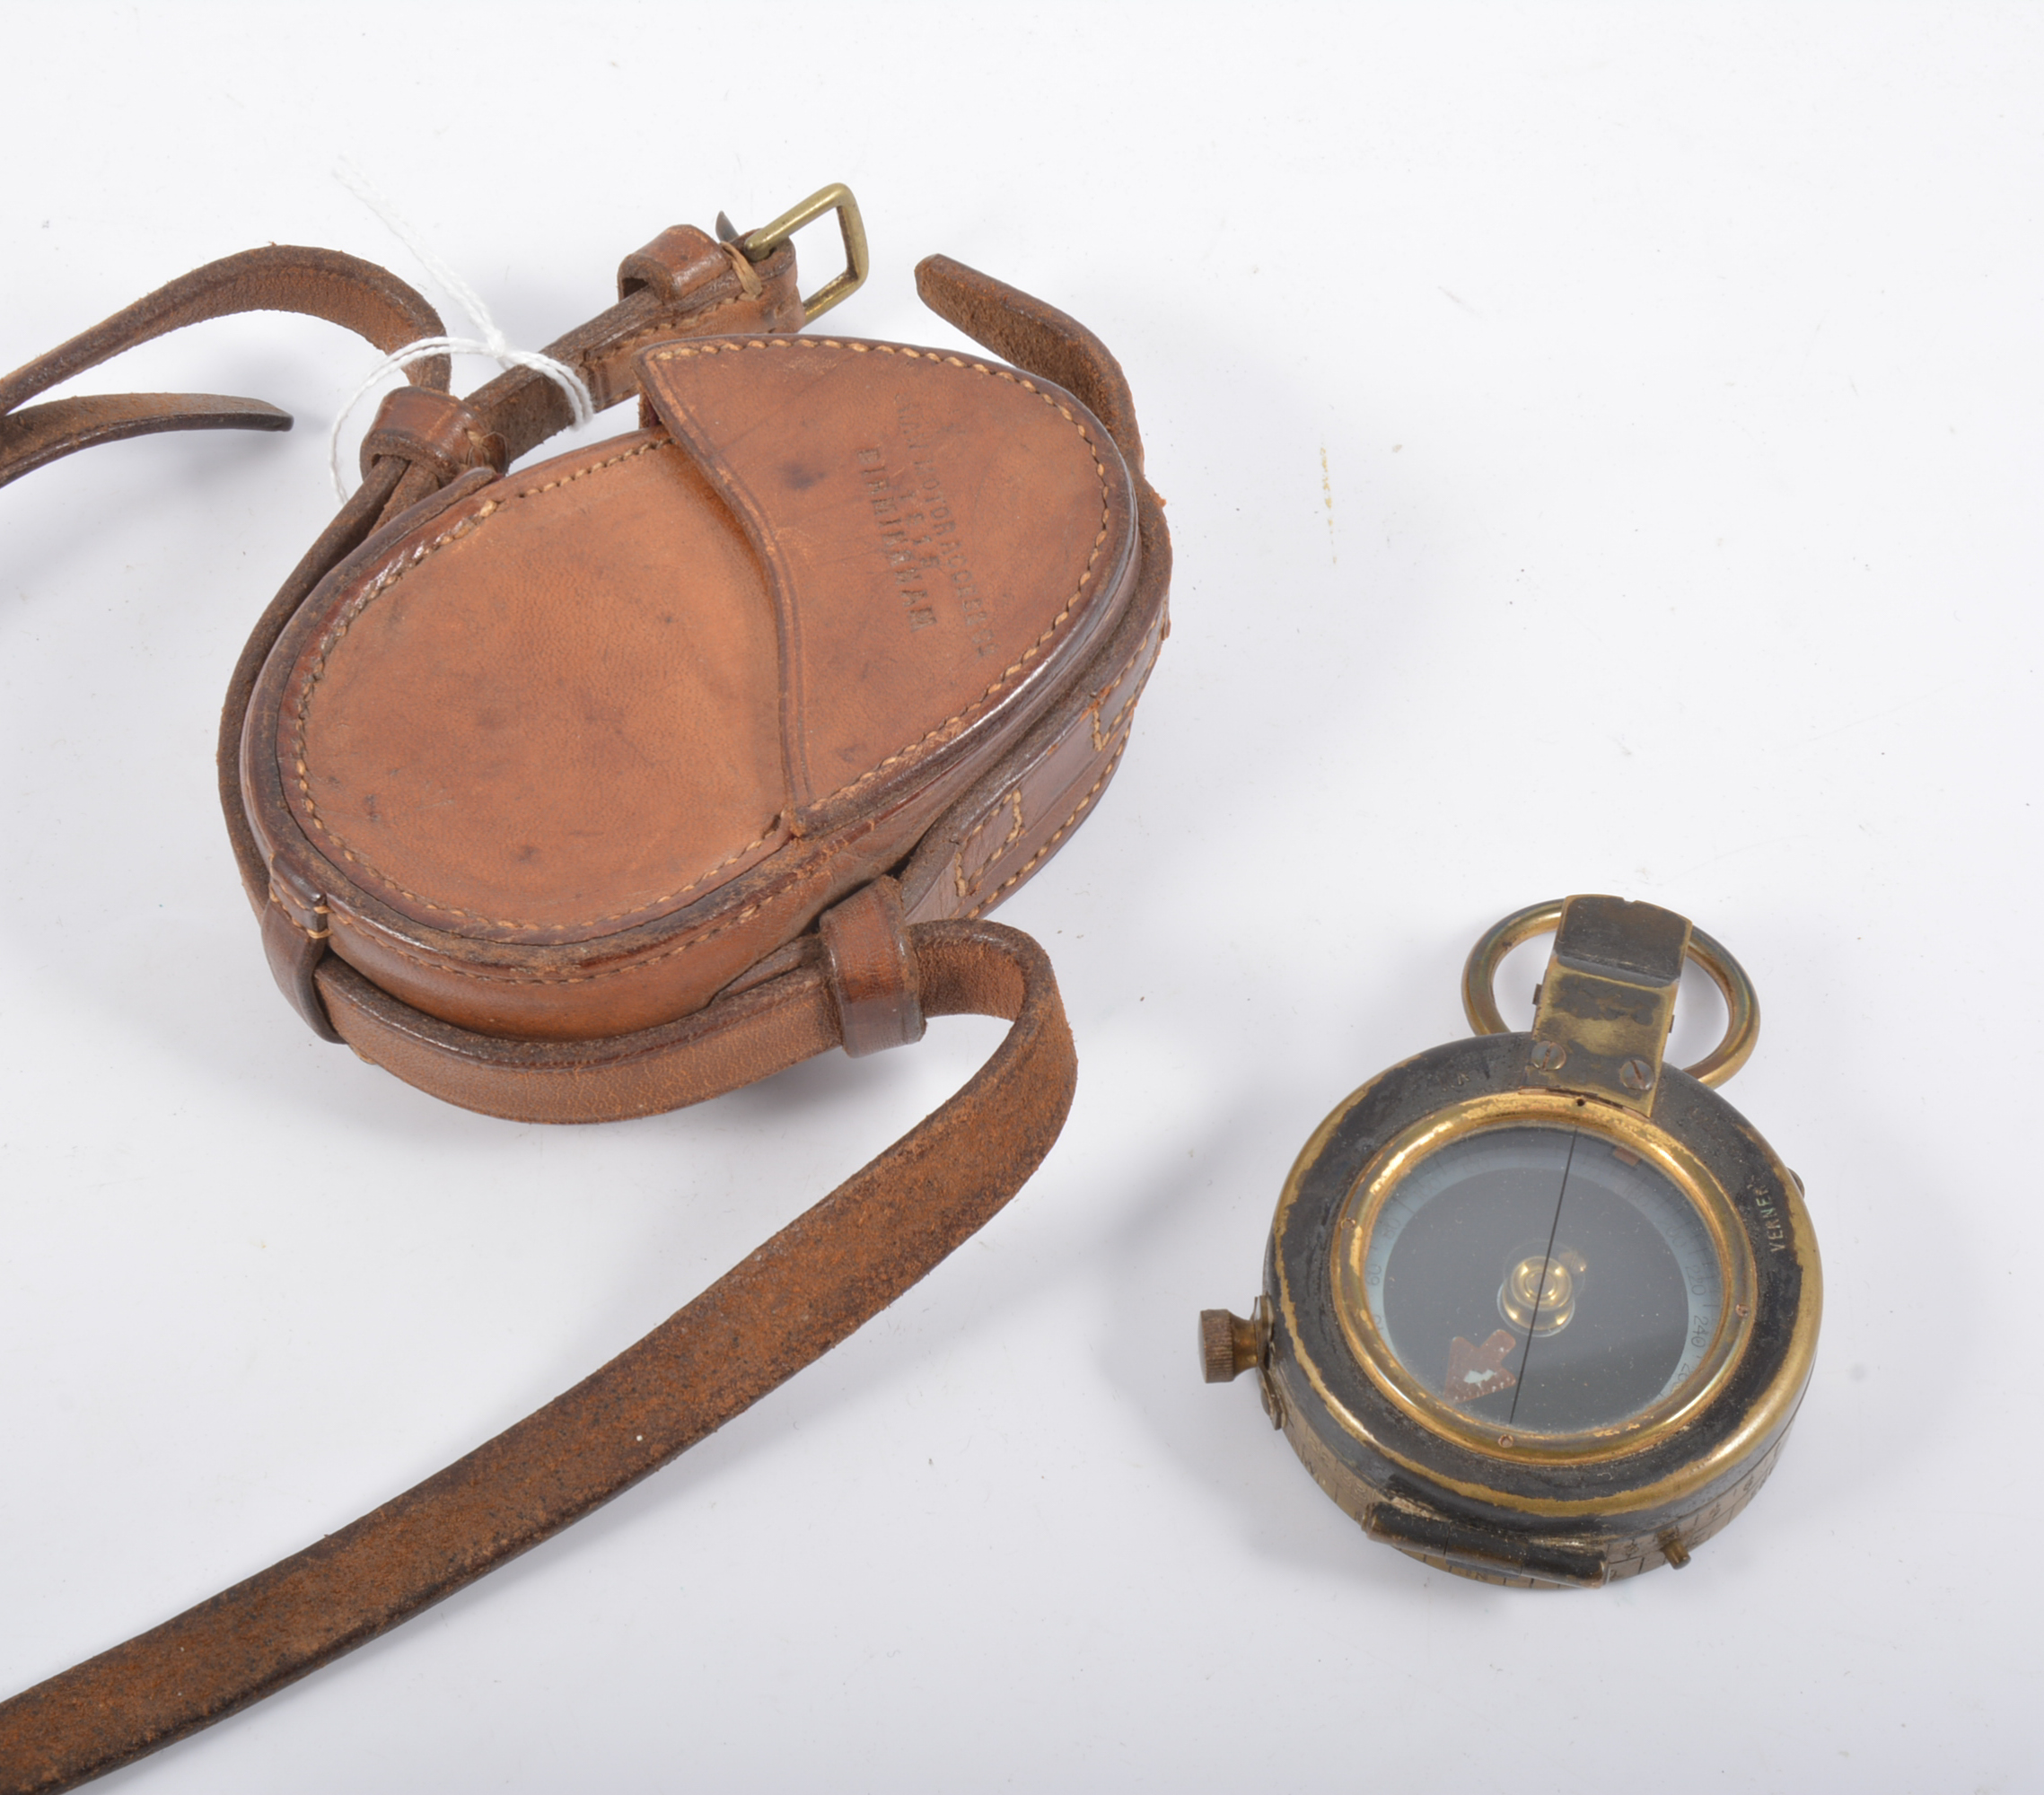 Verner's pattern marching compass, leather case with strap, by Short & Mason Ltd, No 9403, 1915.